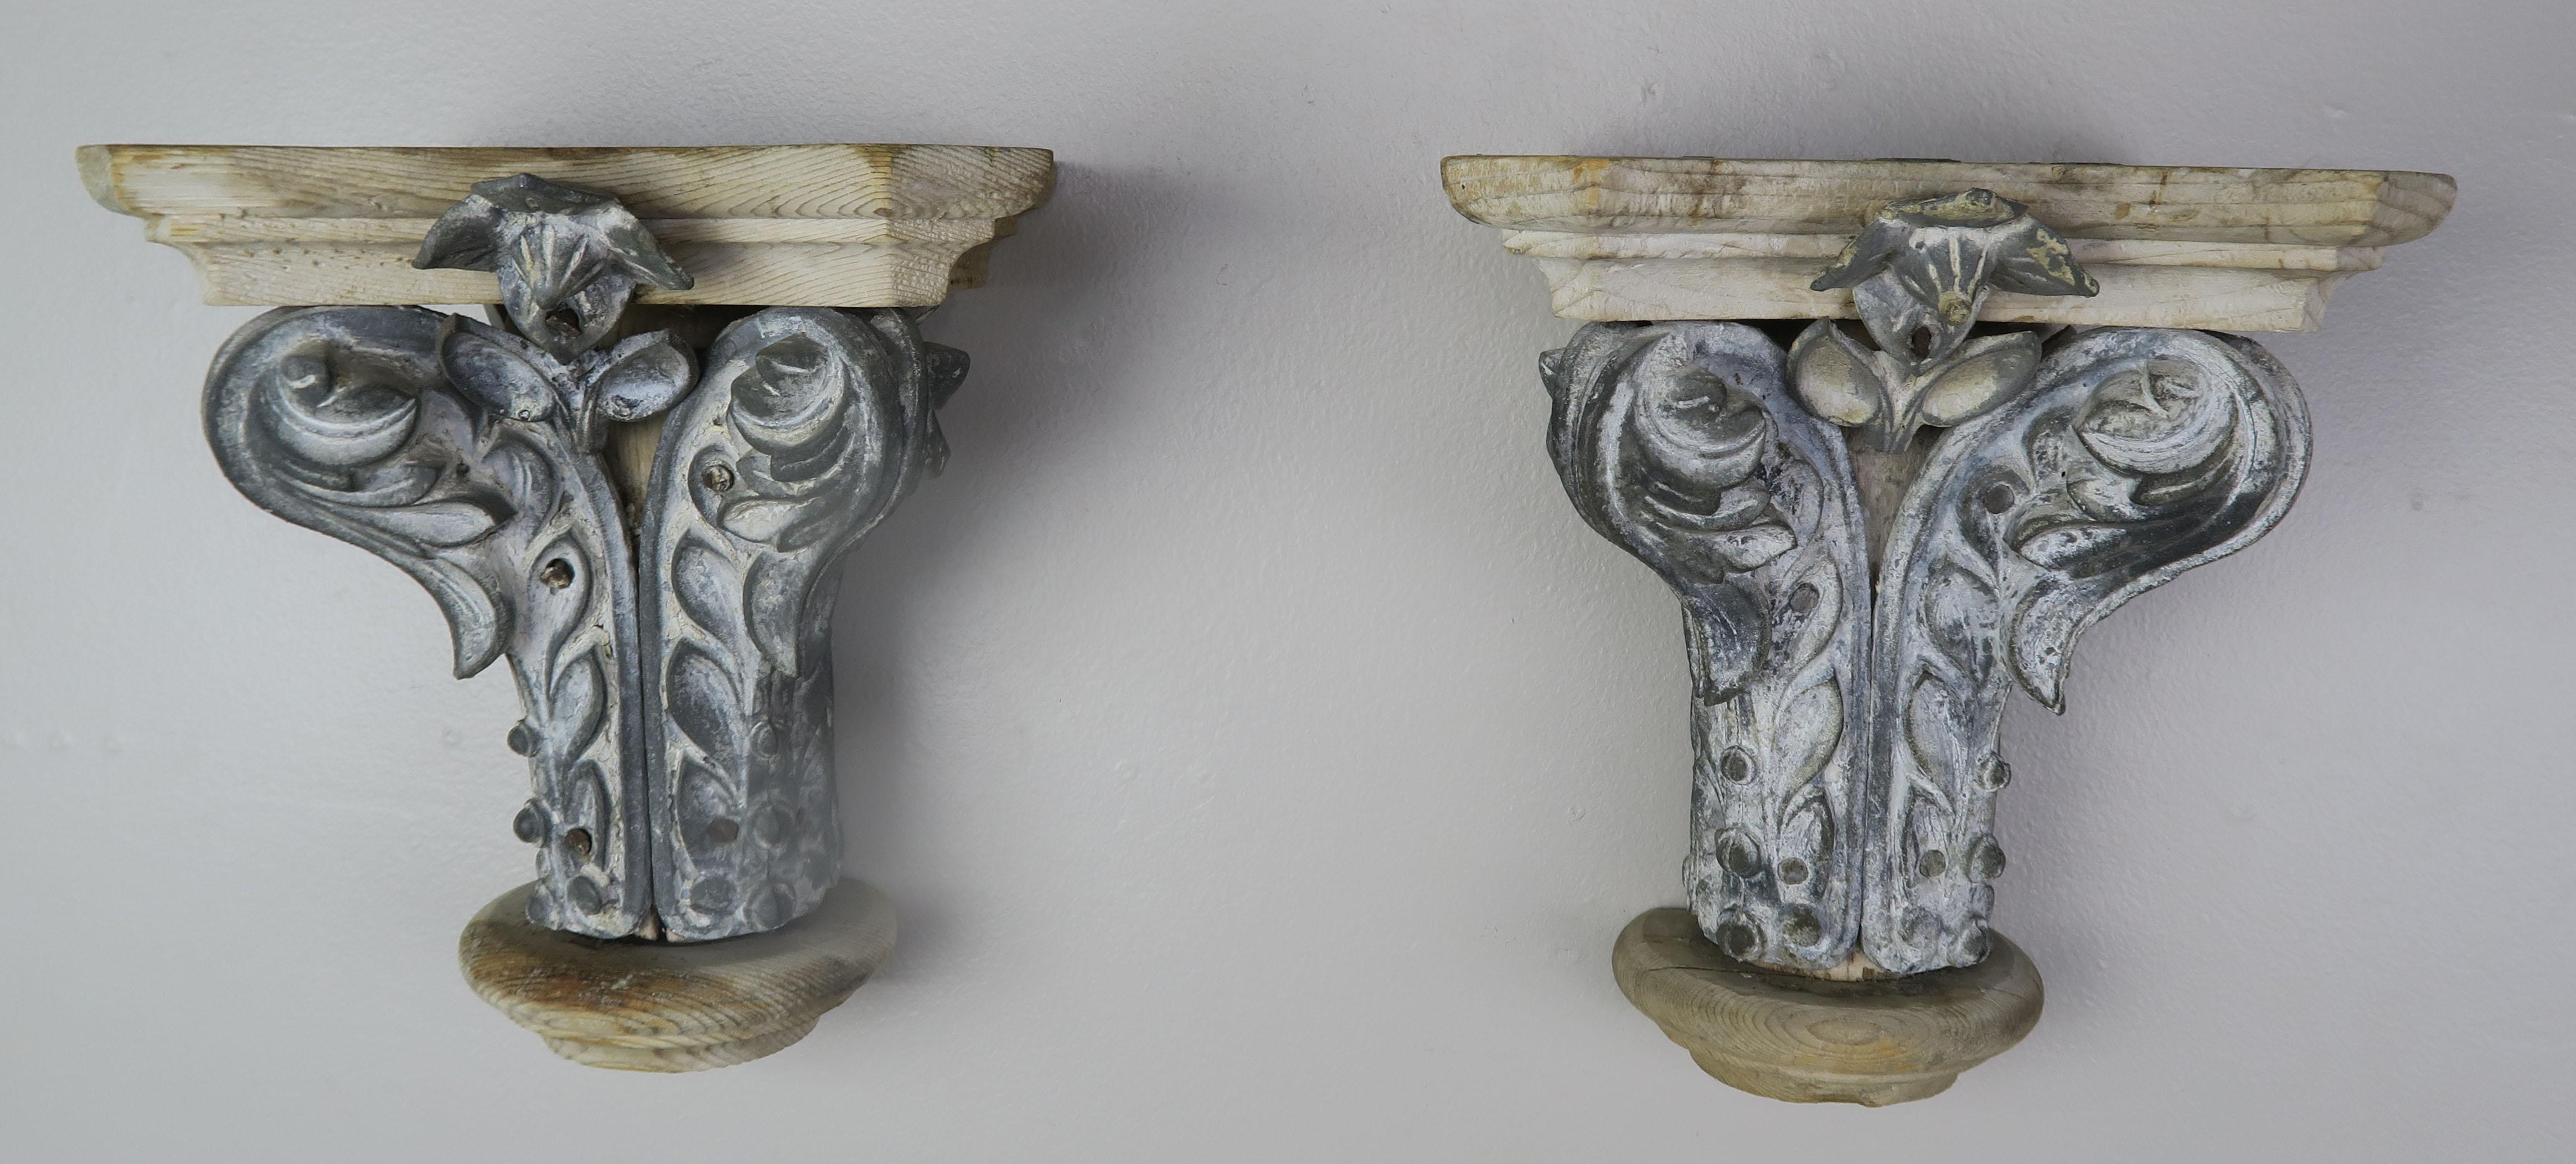 Pair of Italian carved wood painted corbels, circa 1920s. Great wall accent or bookshelf for any style decor. They would also make great bookends on a bookshelf or end table.